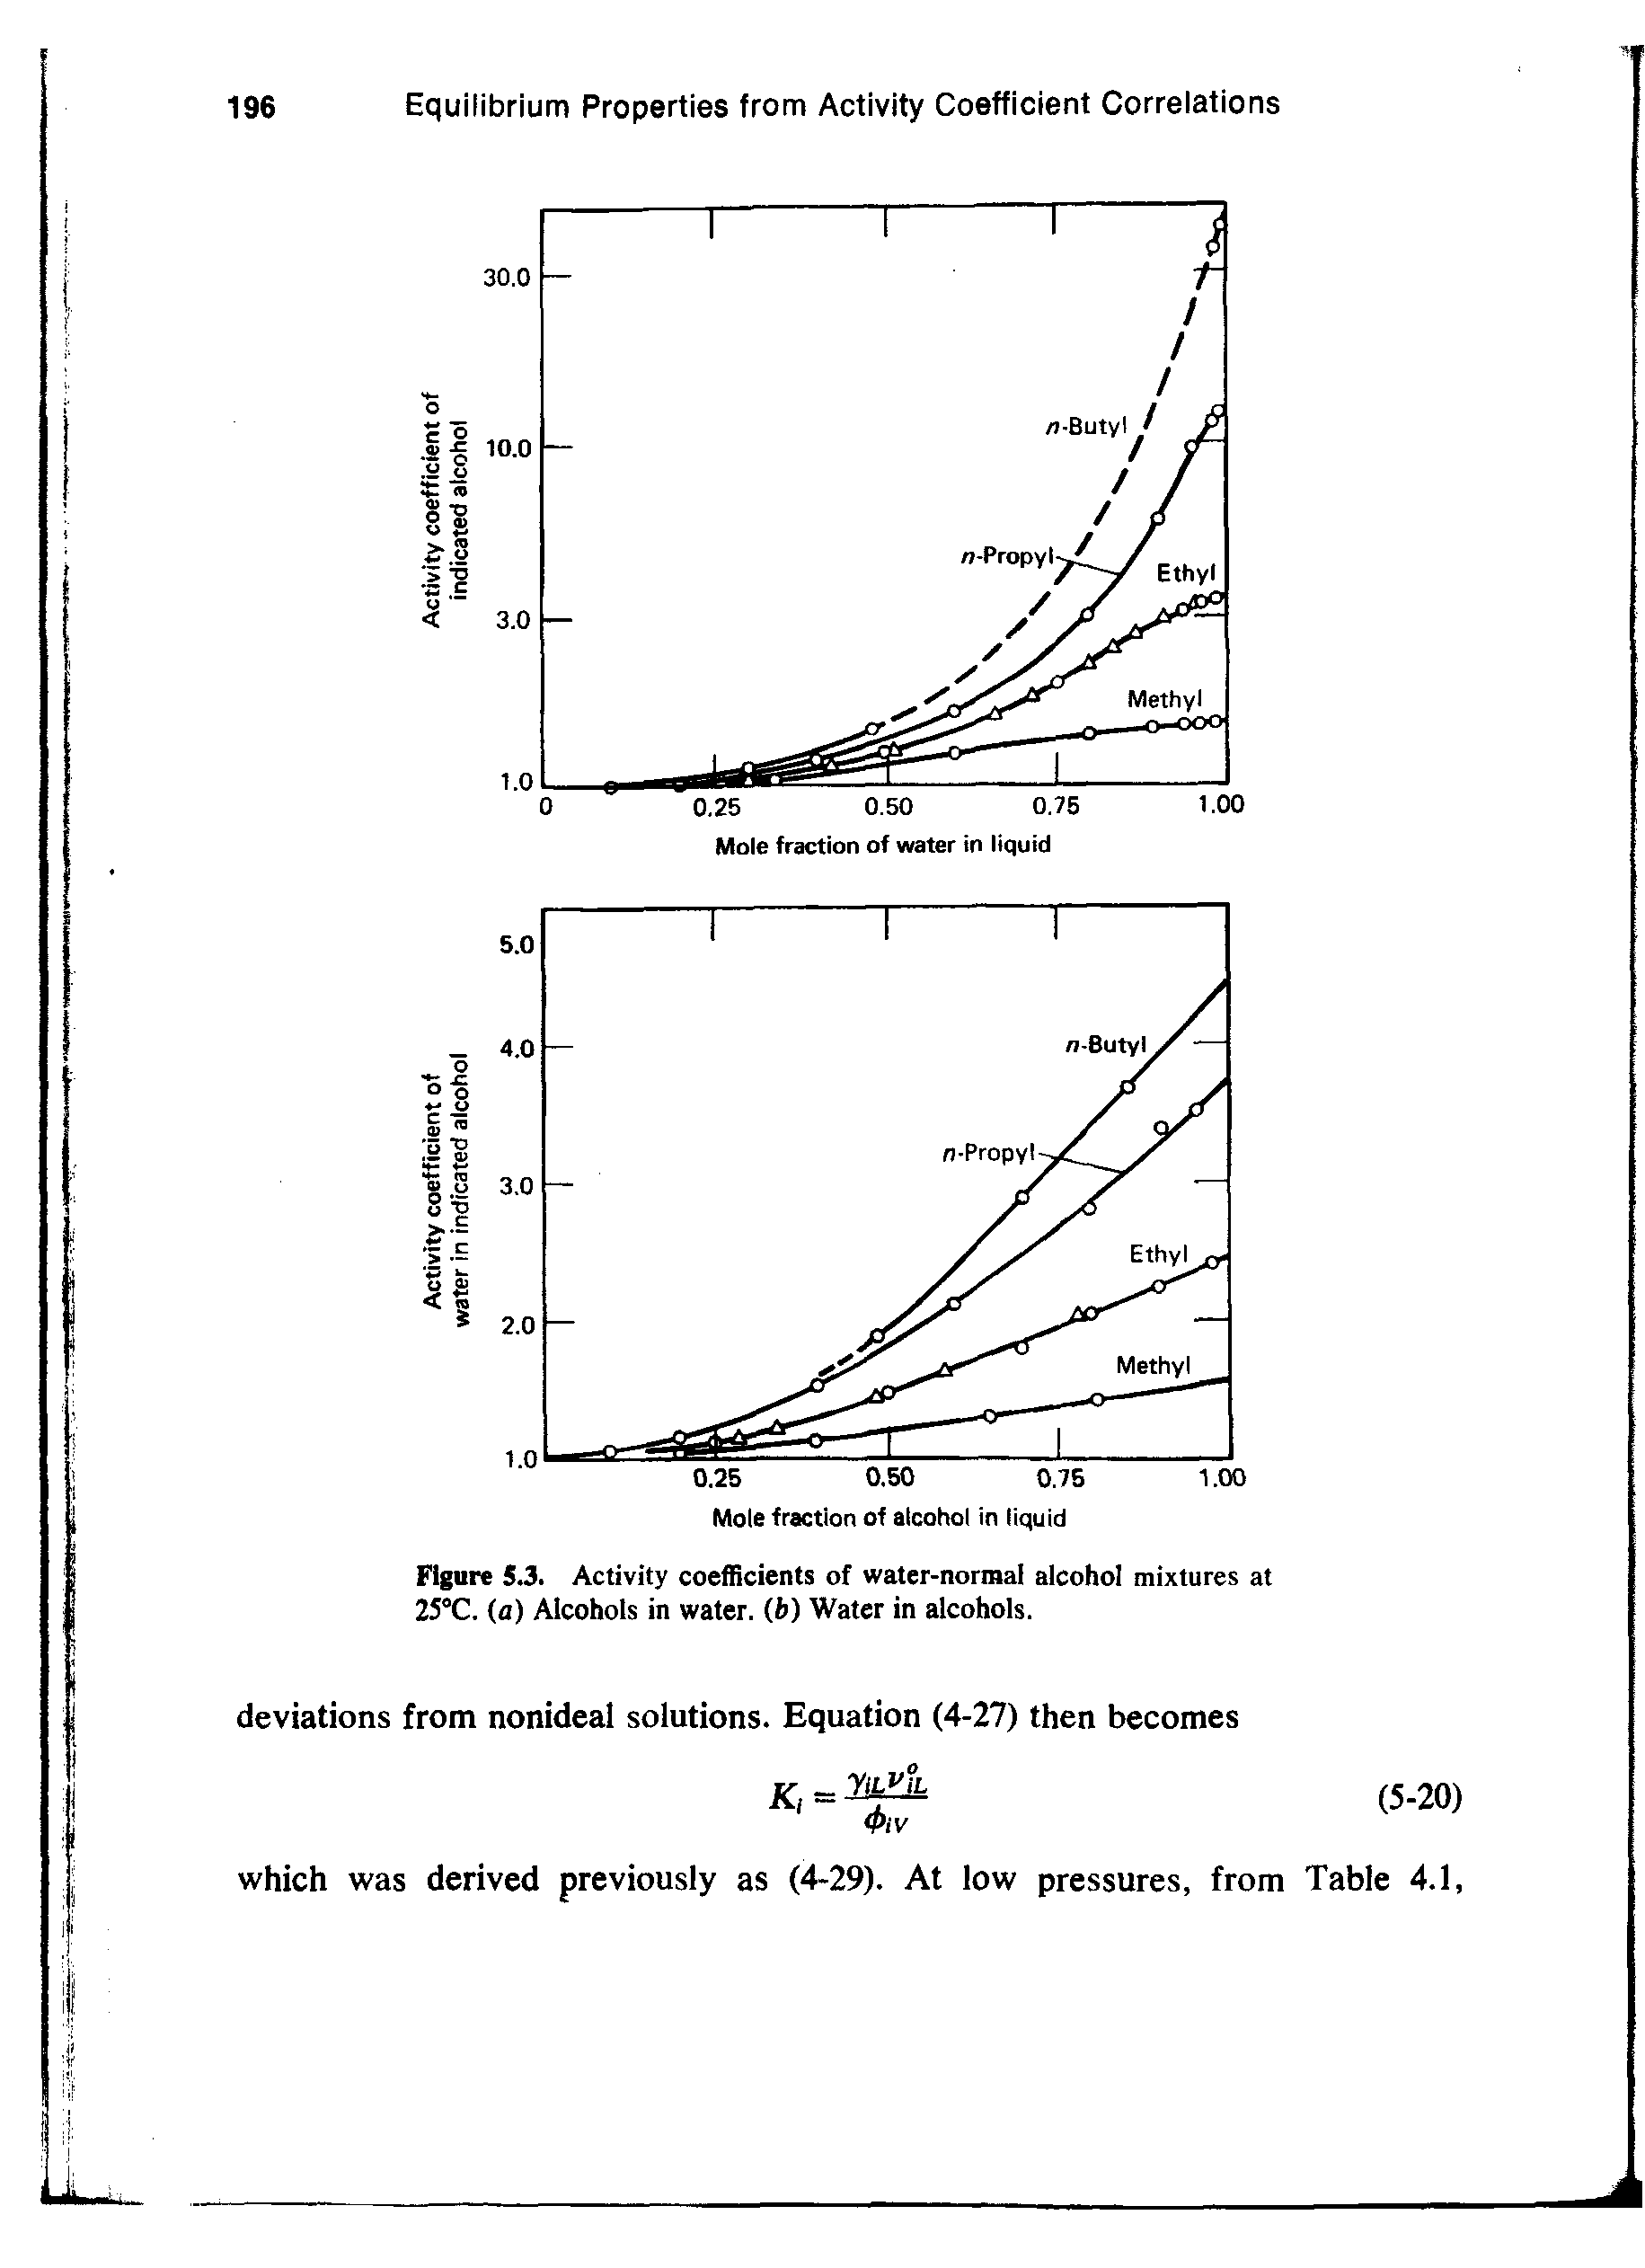 Figure 5.3. Activity coefficients of water-normal alcohol mixtures at 25°C. (a) Alcohols in water, (h) Water in alcohols.